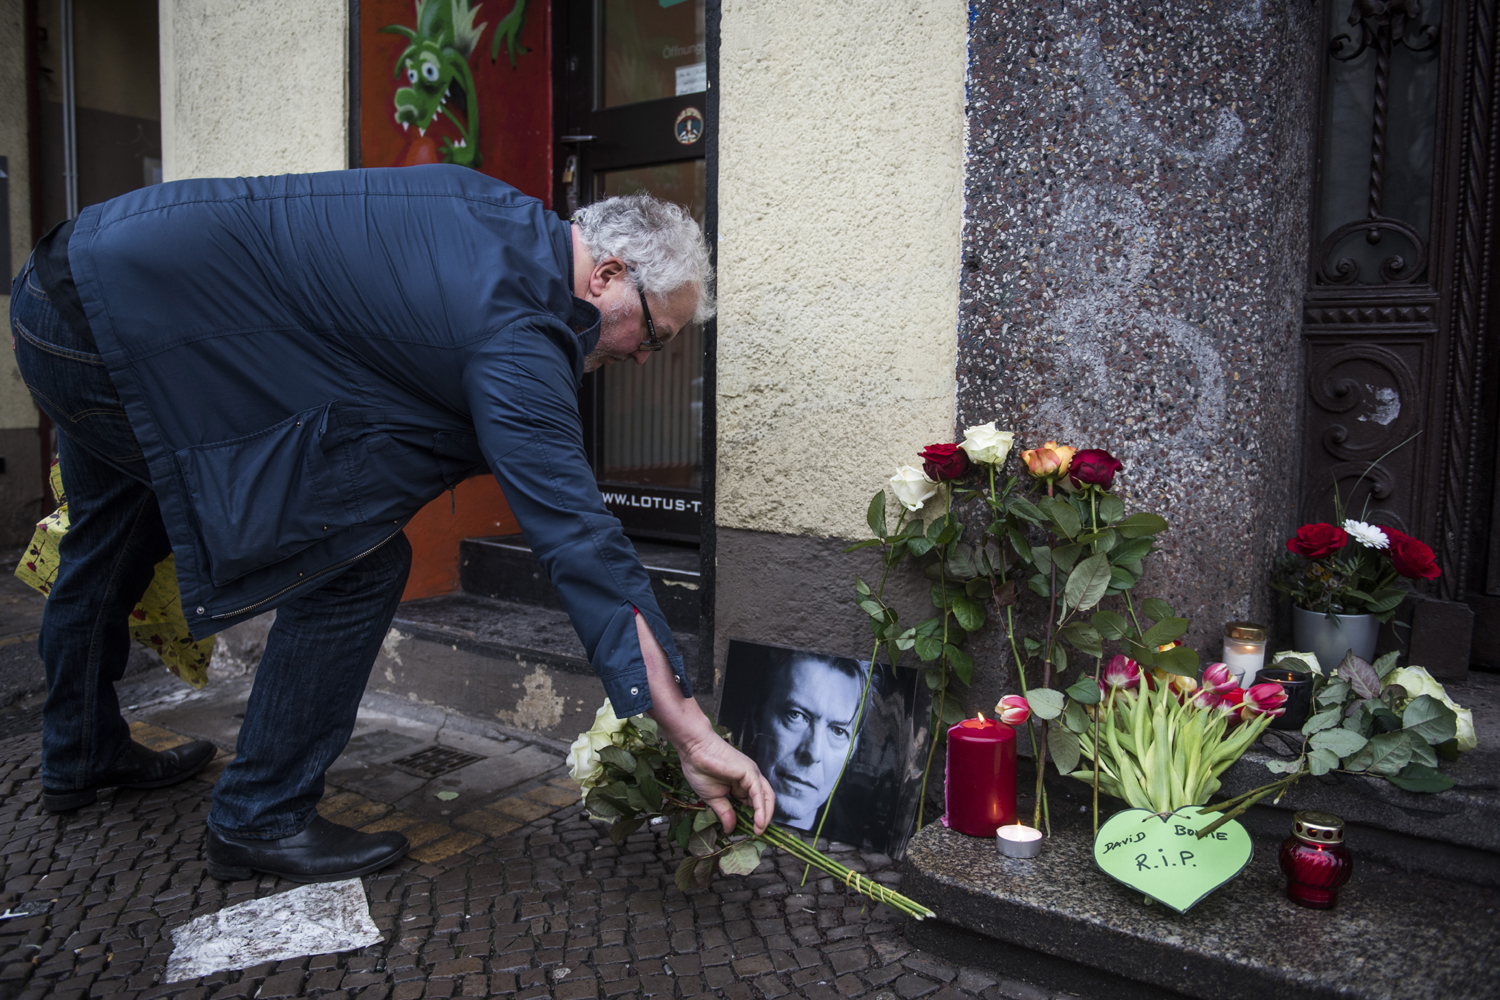 David-Bowie-fan Dirk Turnage puts down a tribute to British rock legend David Bowie outside his former home in Berlin's Hauptstrasse 155 on January 11, 2016. British rock music legend David Bowie has died after a long battle with cancer, his official Twitter and Facebook accounts said. / AFP / ODD ANDERSEN